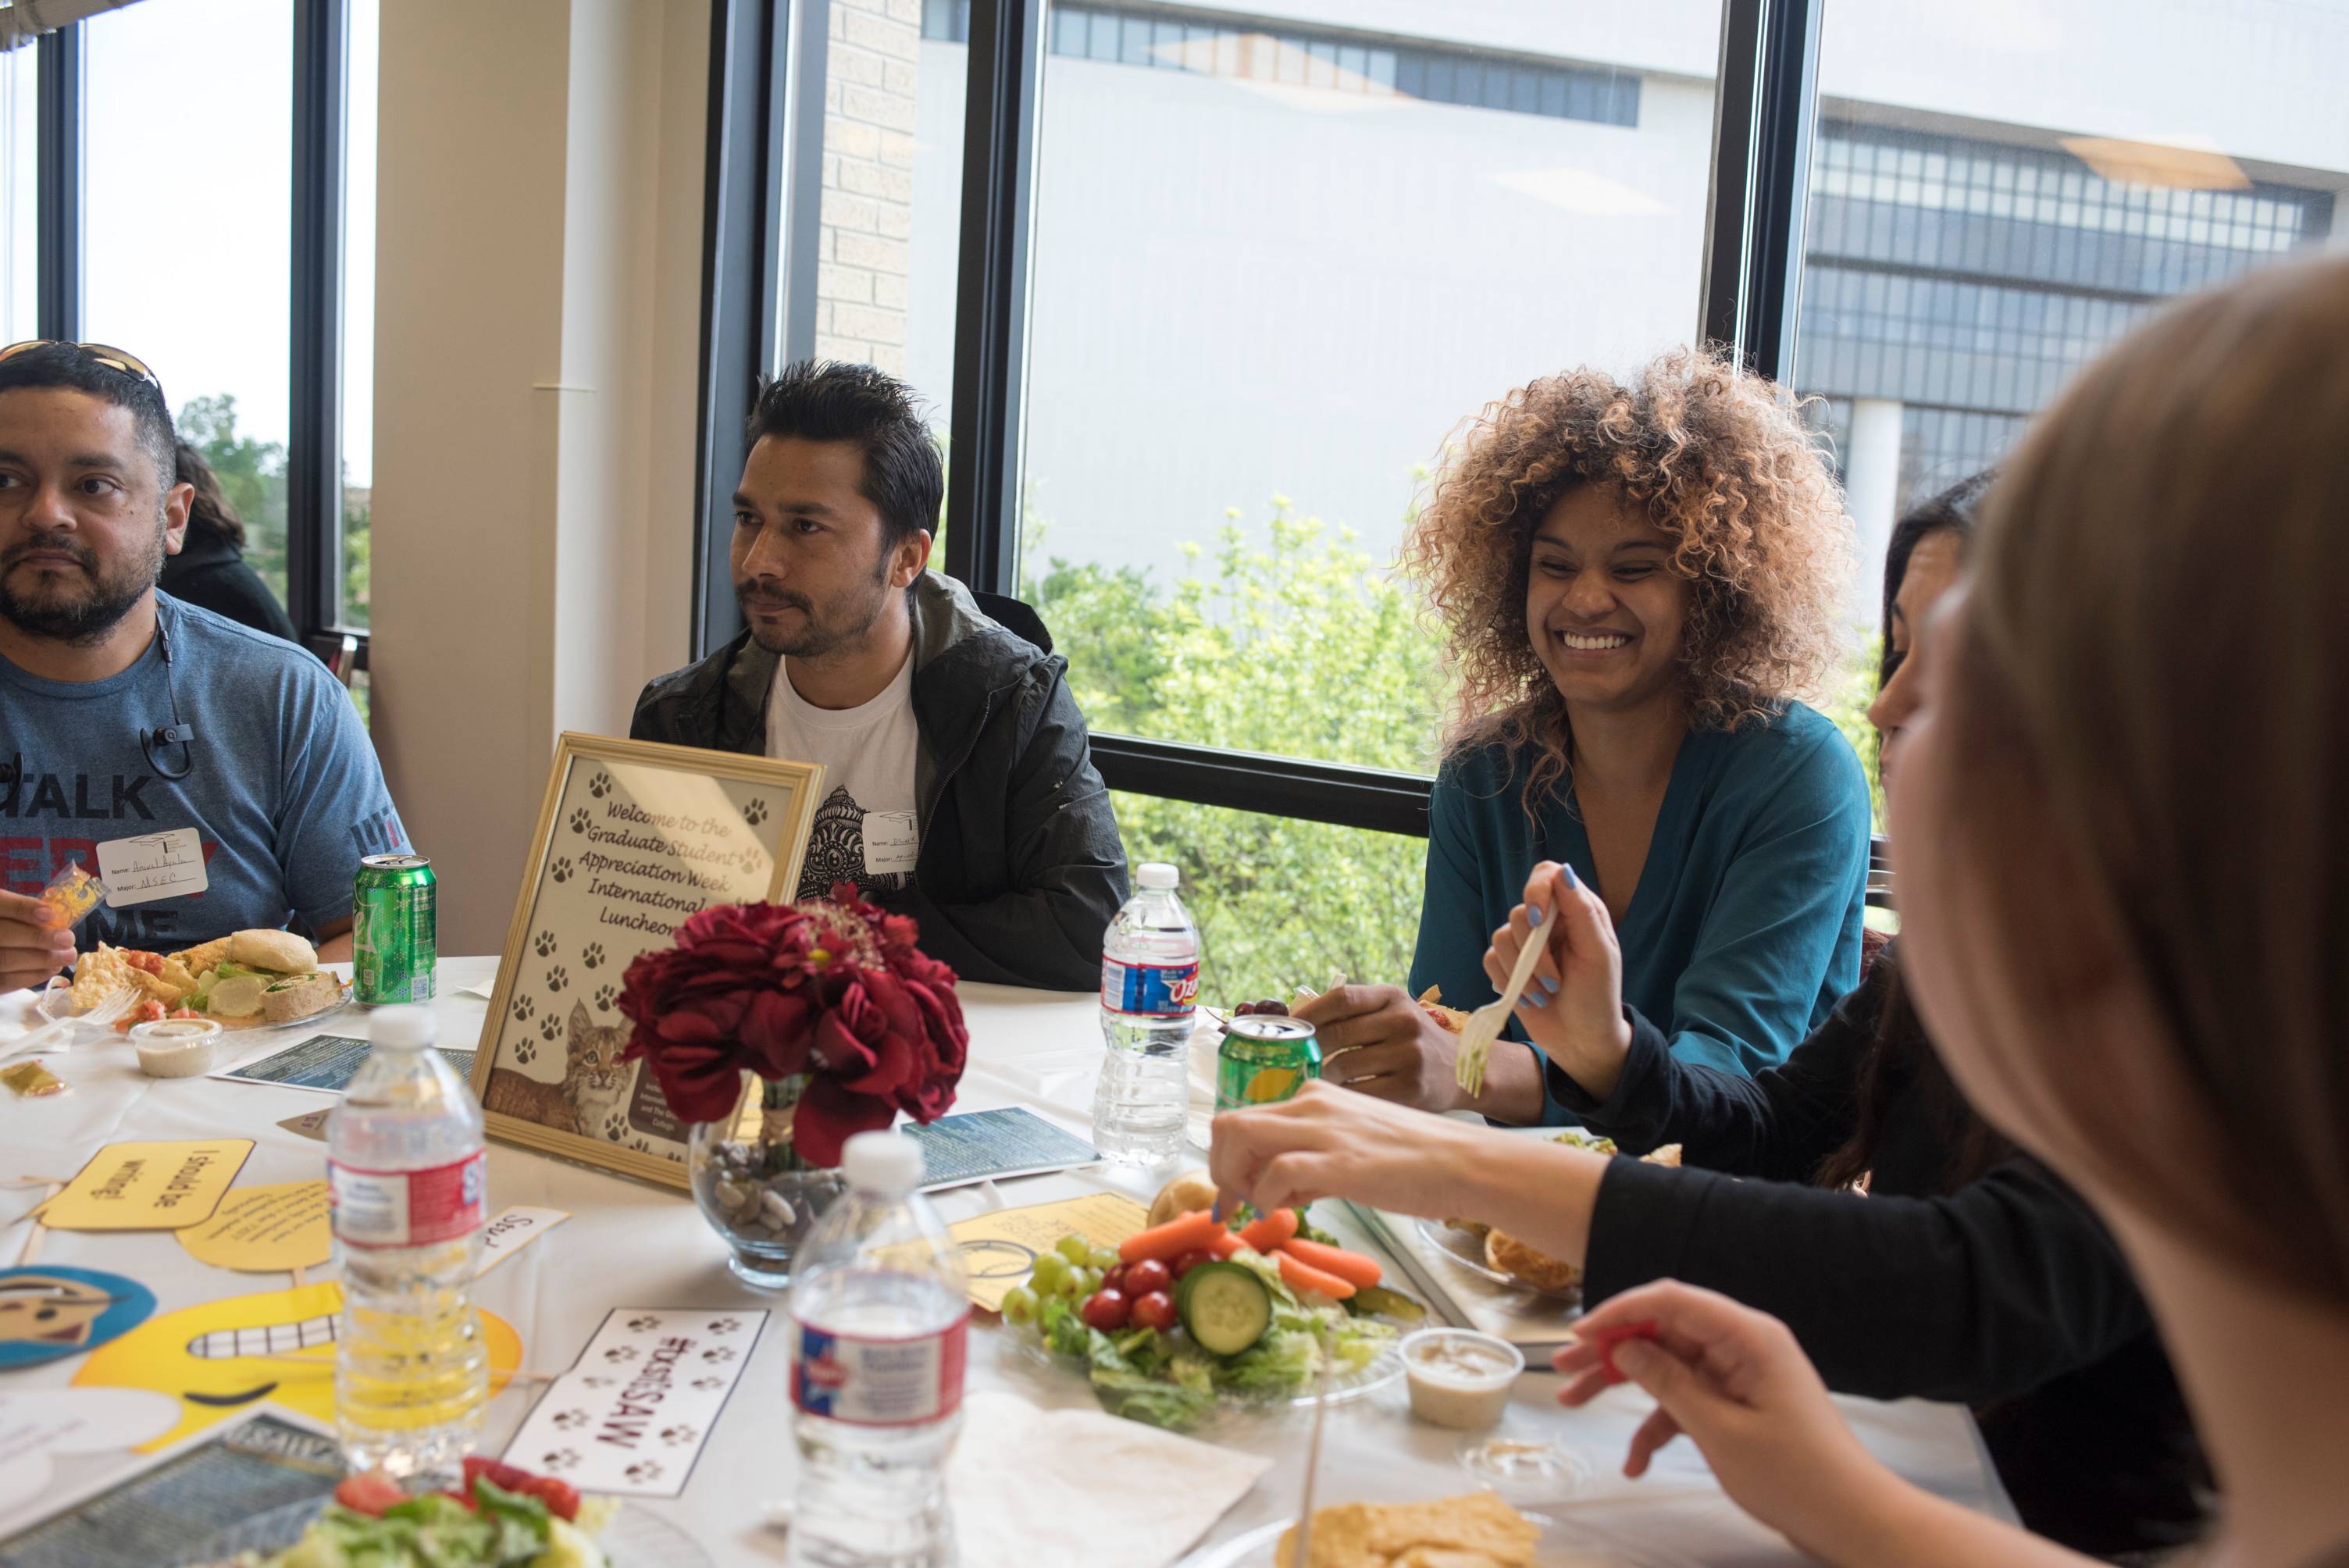 a group of students share a table and conversation during an event luncheon